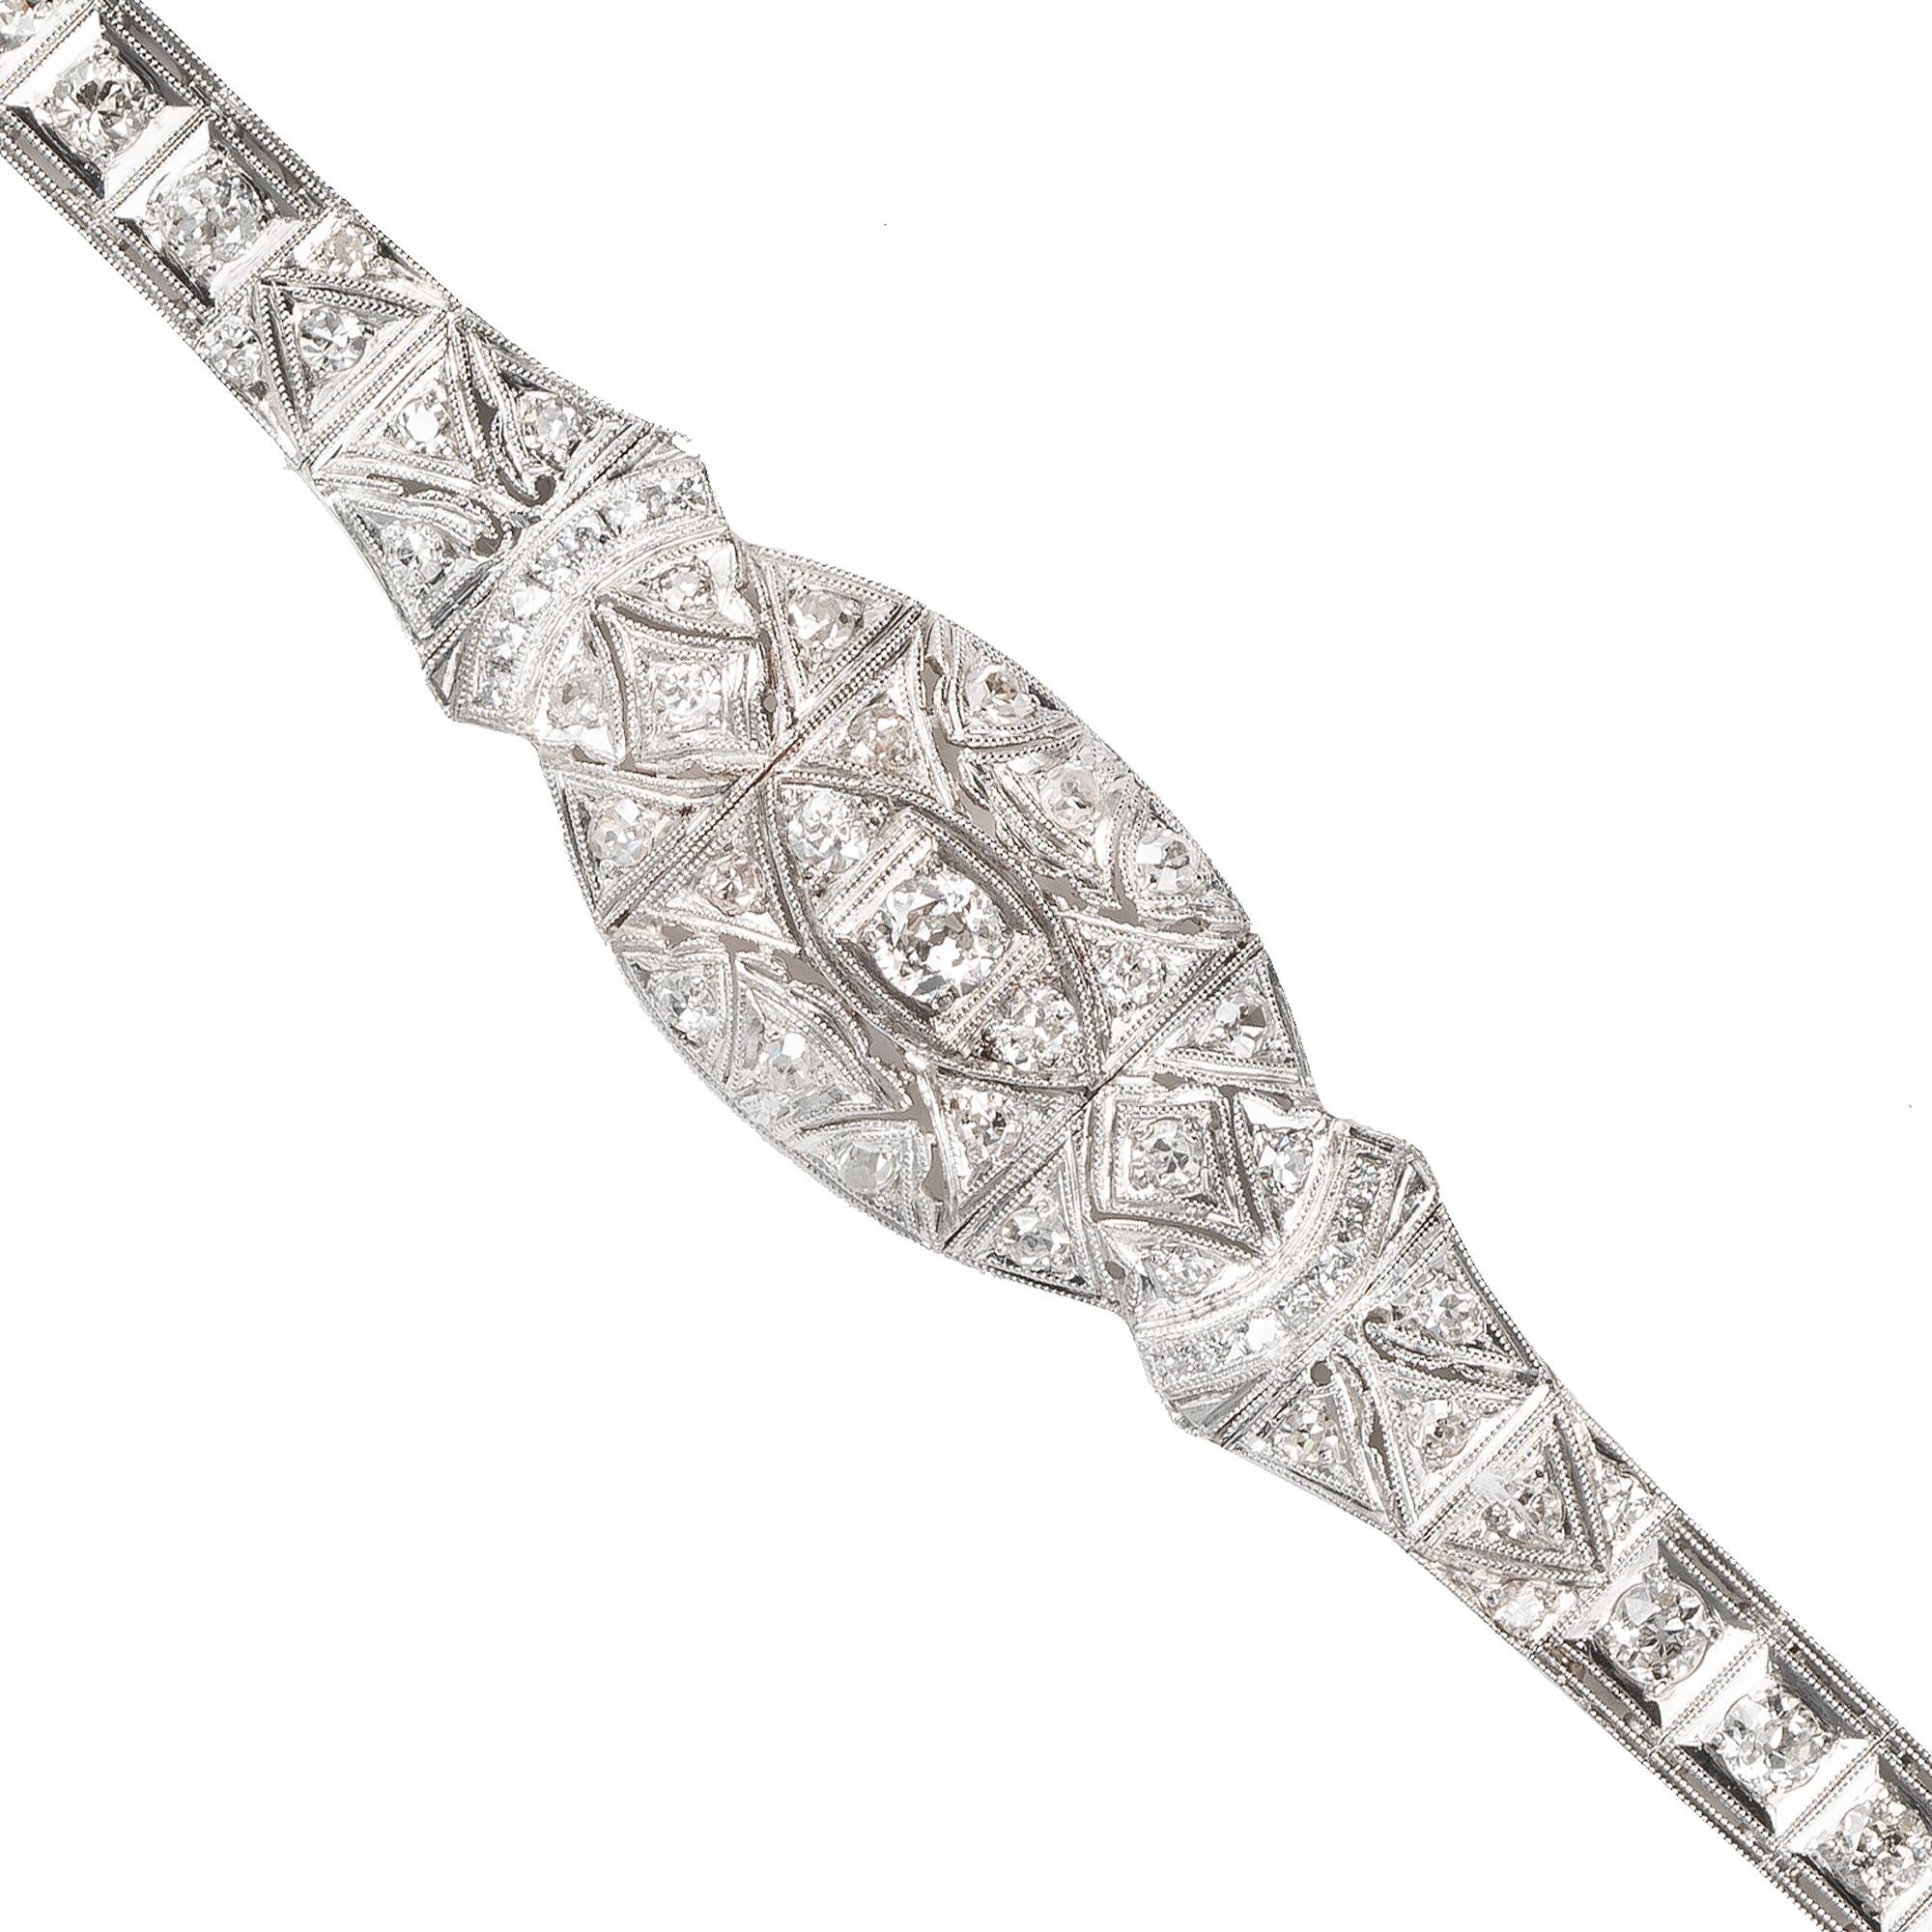 1920's Art Deco original engraved filigree hinged link diamond platinum bracelet. Old Euro and french cut diamonds totaling 2.48 cts. 

64 round mixed old euro cut H-J VS-SI diamonds, Approximate 2.20cts 
14 french cut F-S VS diamonds, Approximate